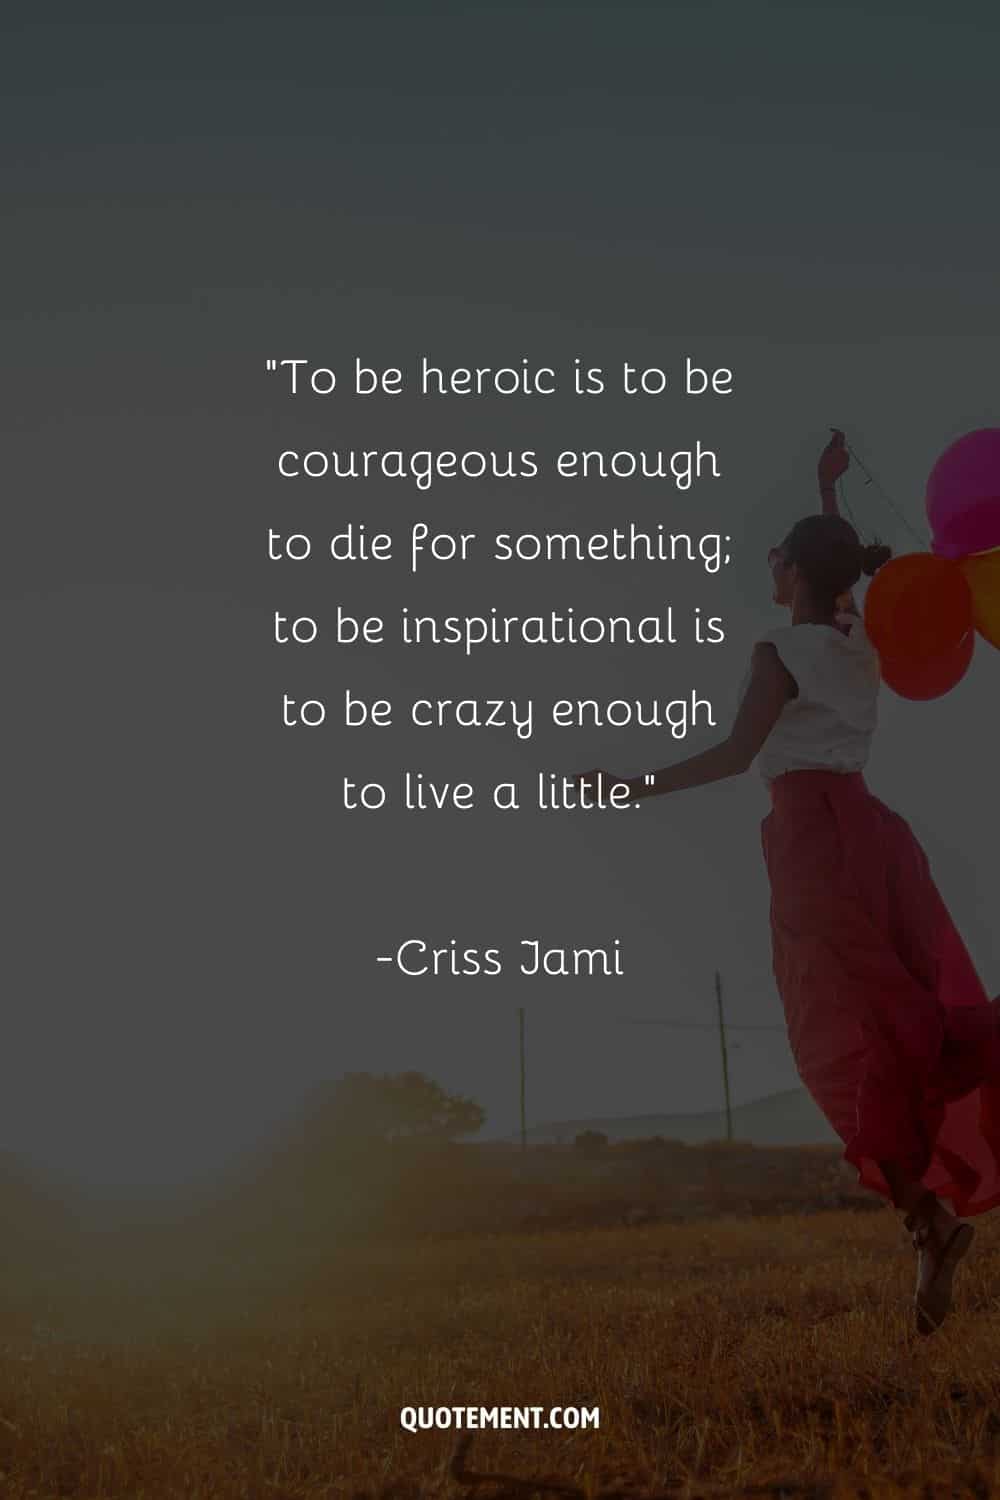 a happy woman jumping and carrying balloons representing inspiring live life quote